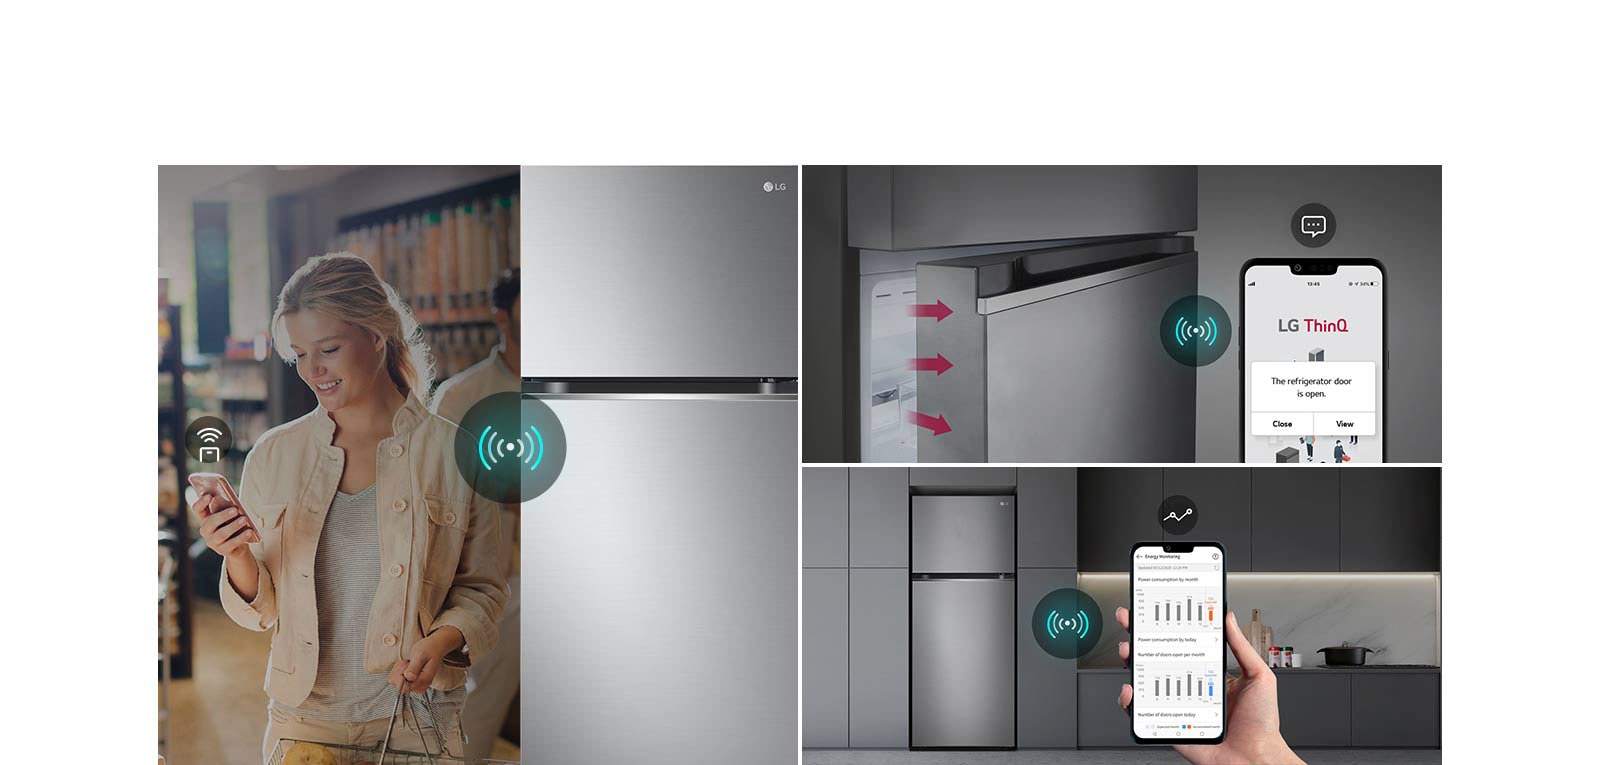 This image is a combination of images describing three different functions. It combines images of remote control through WiFi-enabled devices, smart alerts through the smartphone app when the refrigerator door is opened, and images of refrigerator status being monitored through the smartphone app.